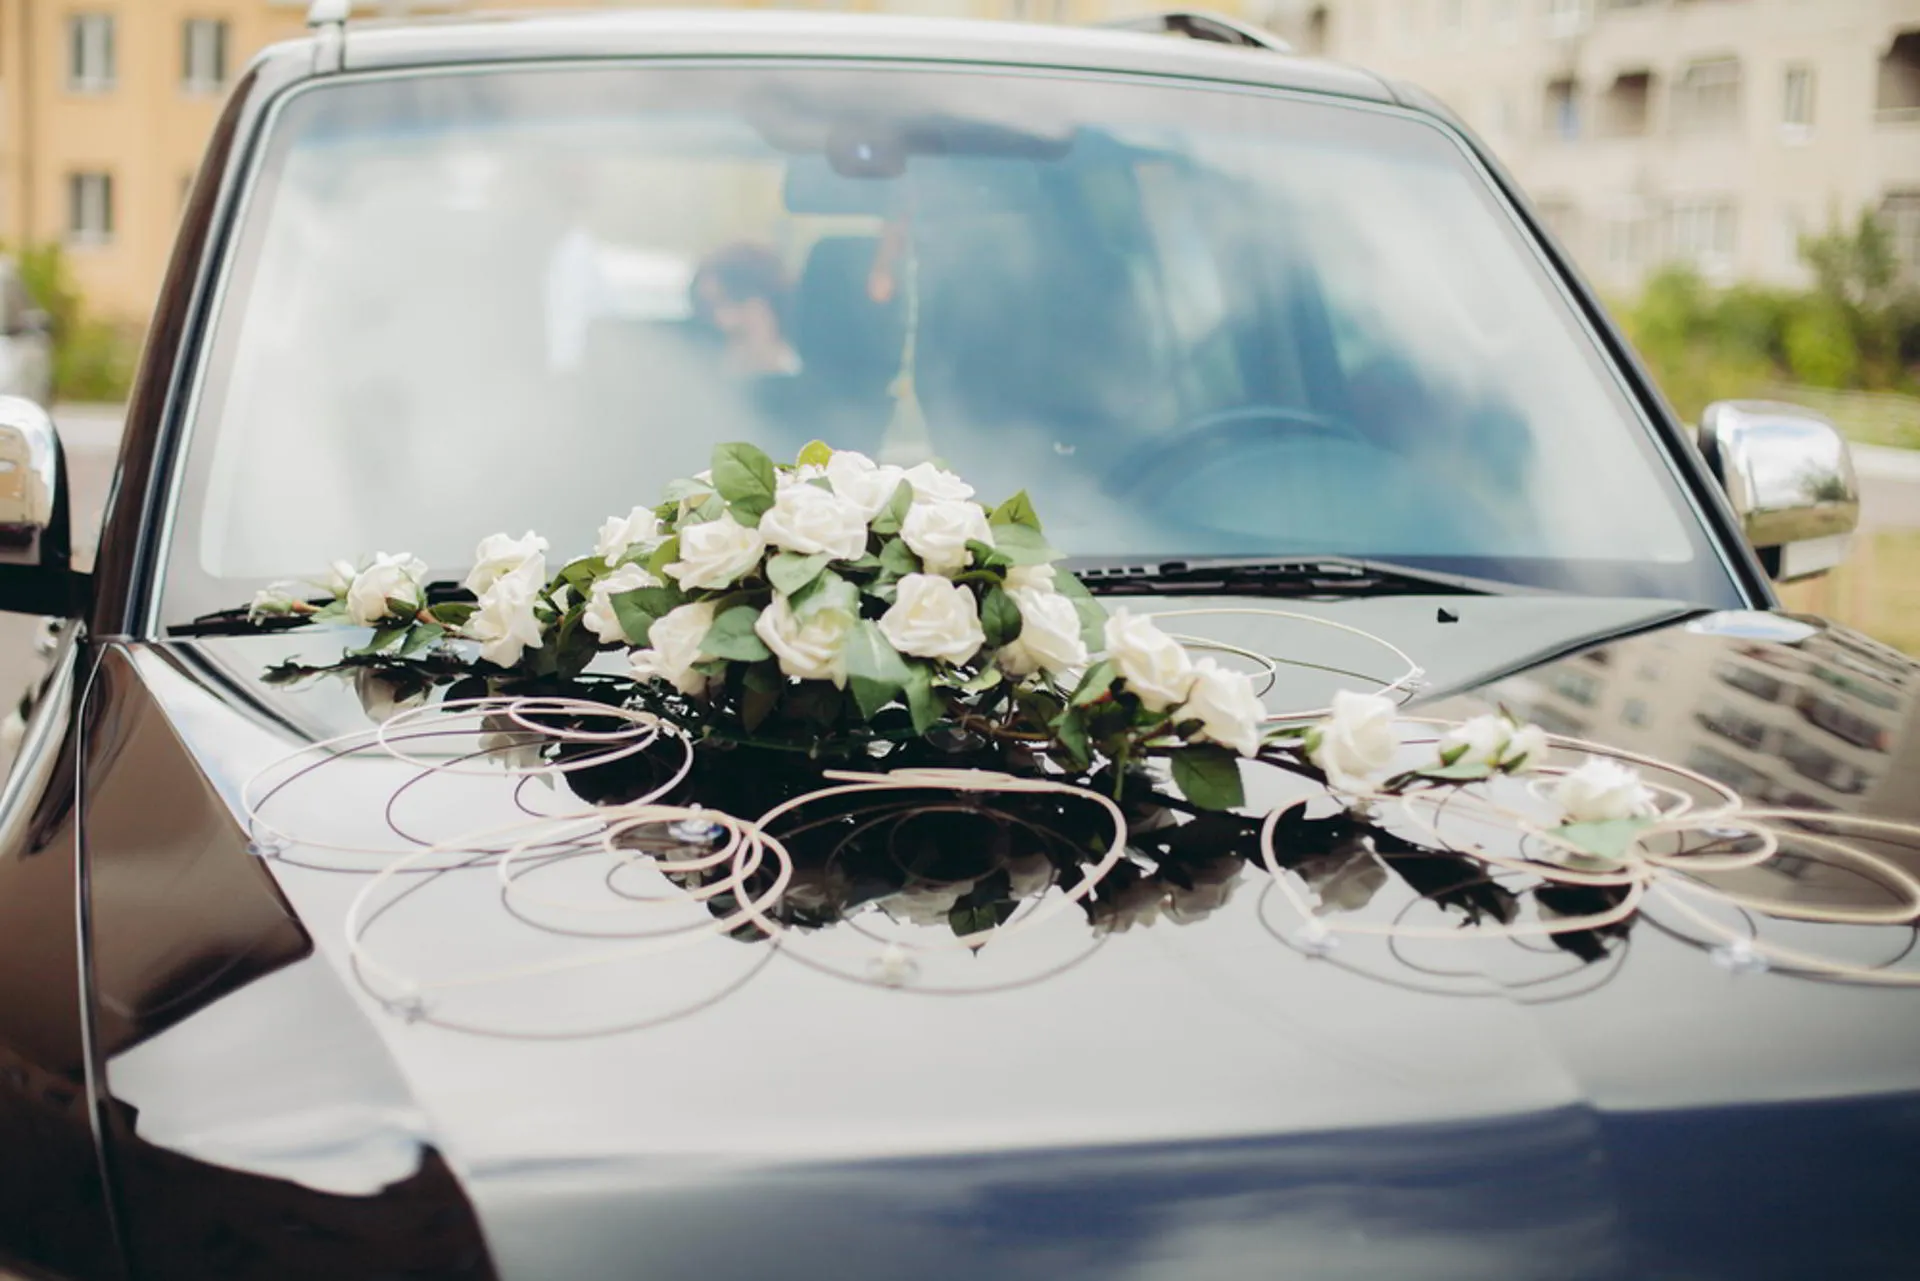 A Black Wedding Car Decorated with Roses. Luxury Wedding Car Decorated with  Flowers and Ribbons Stock Photo - Image of decor, adult: 74176126